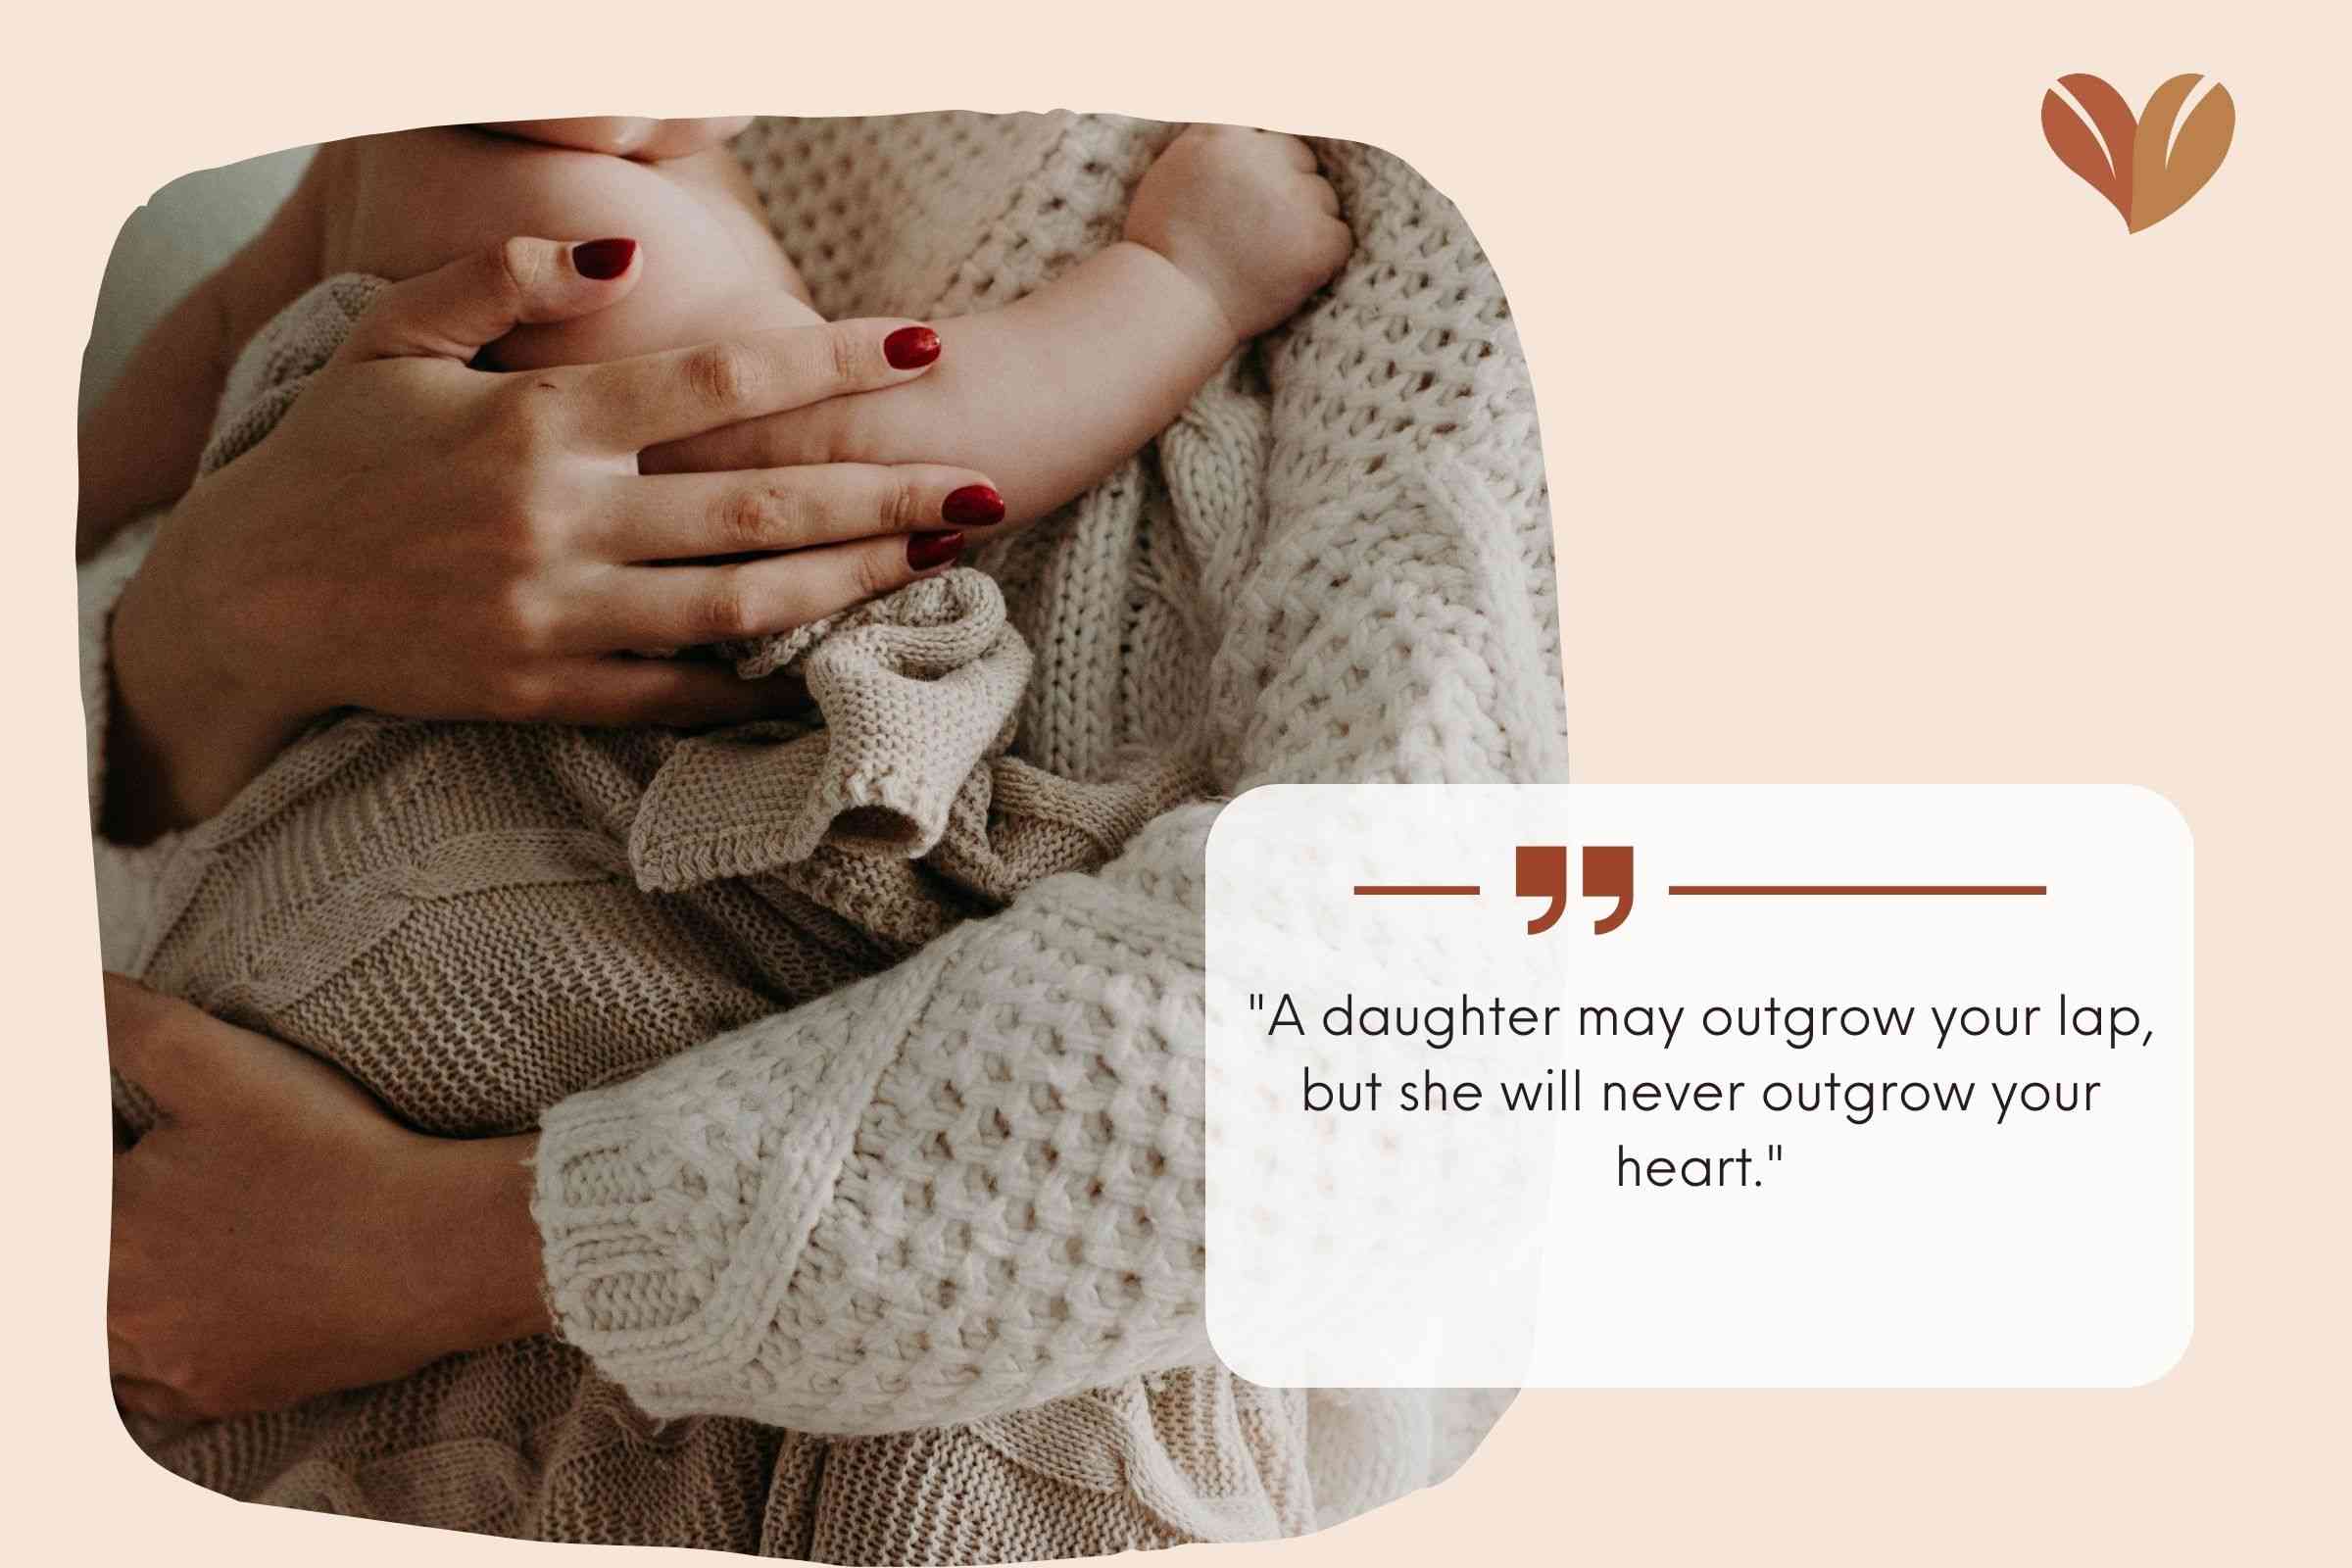 "A daughter may outgrow your lap, but she will never outgrow your heart."